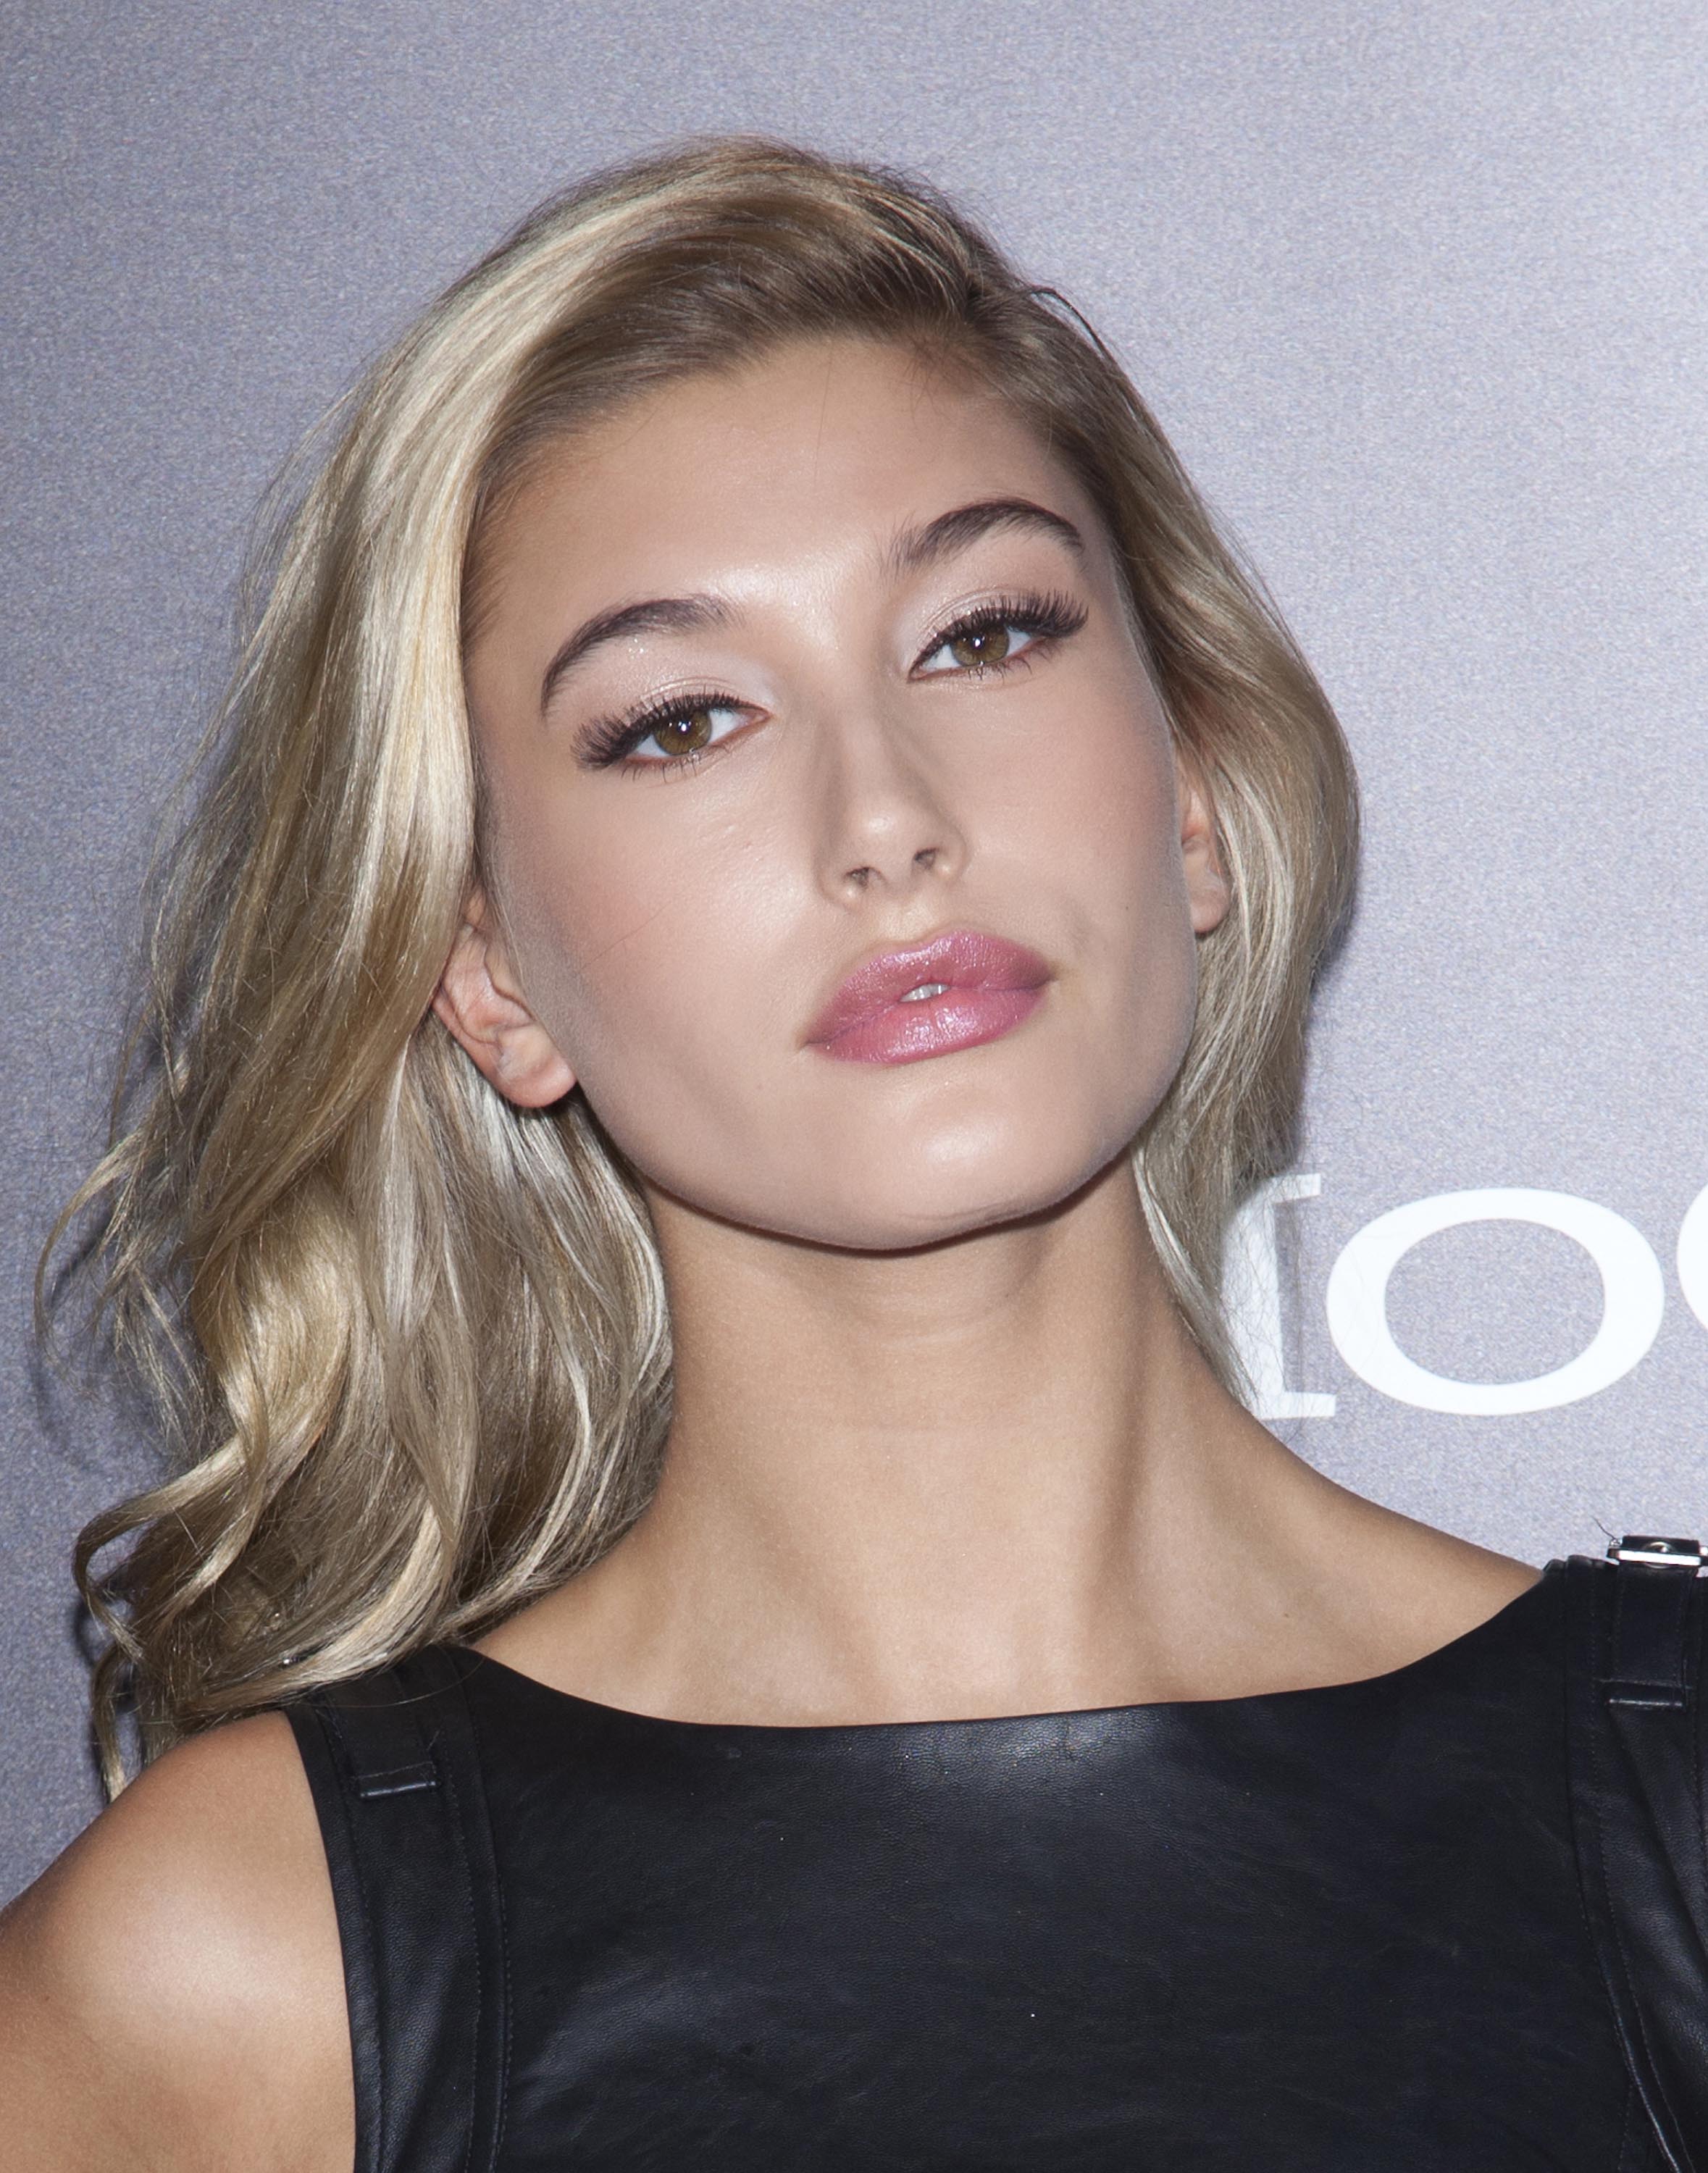 Hailey Baldwin attends the One Direction This Is Us world premiere